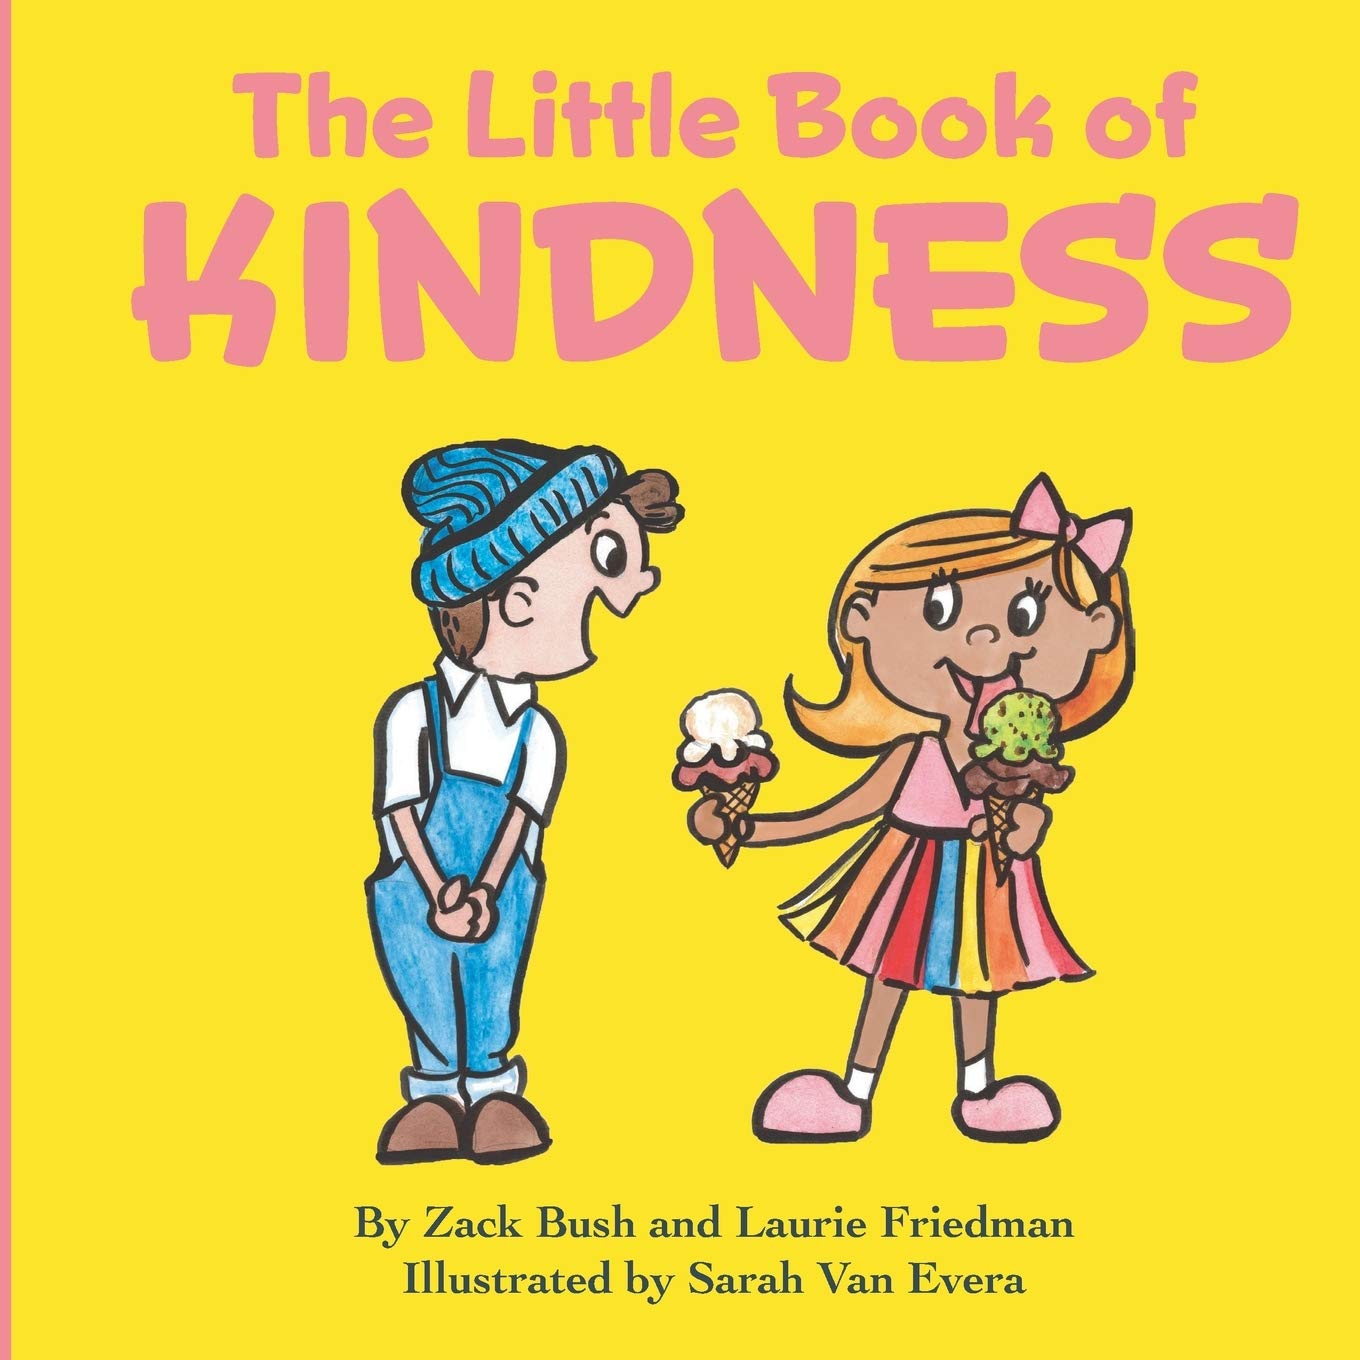 25+ Books for Kids About Kindness